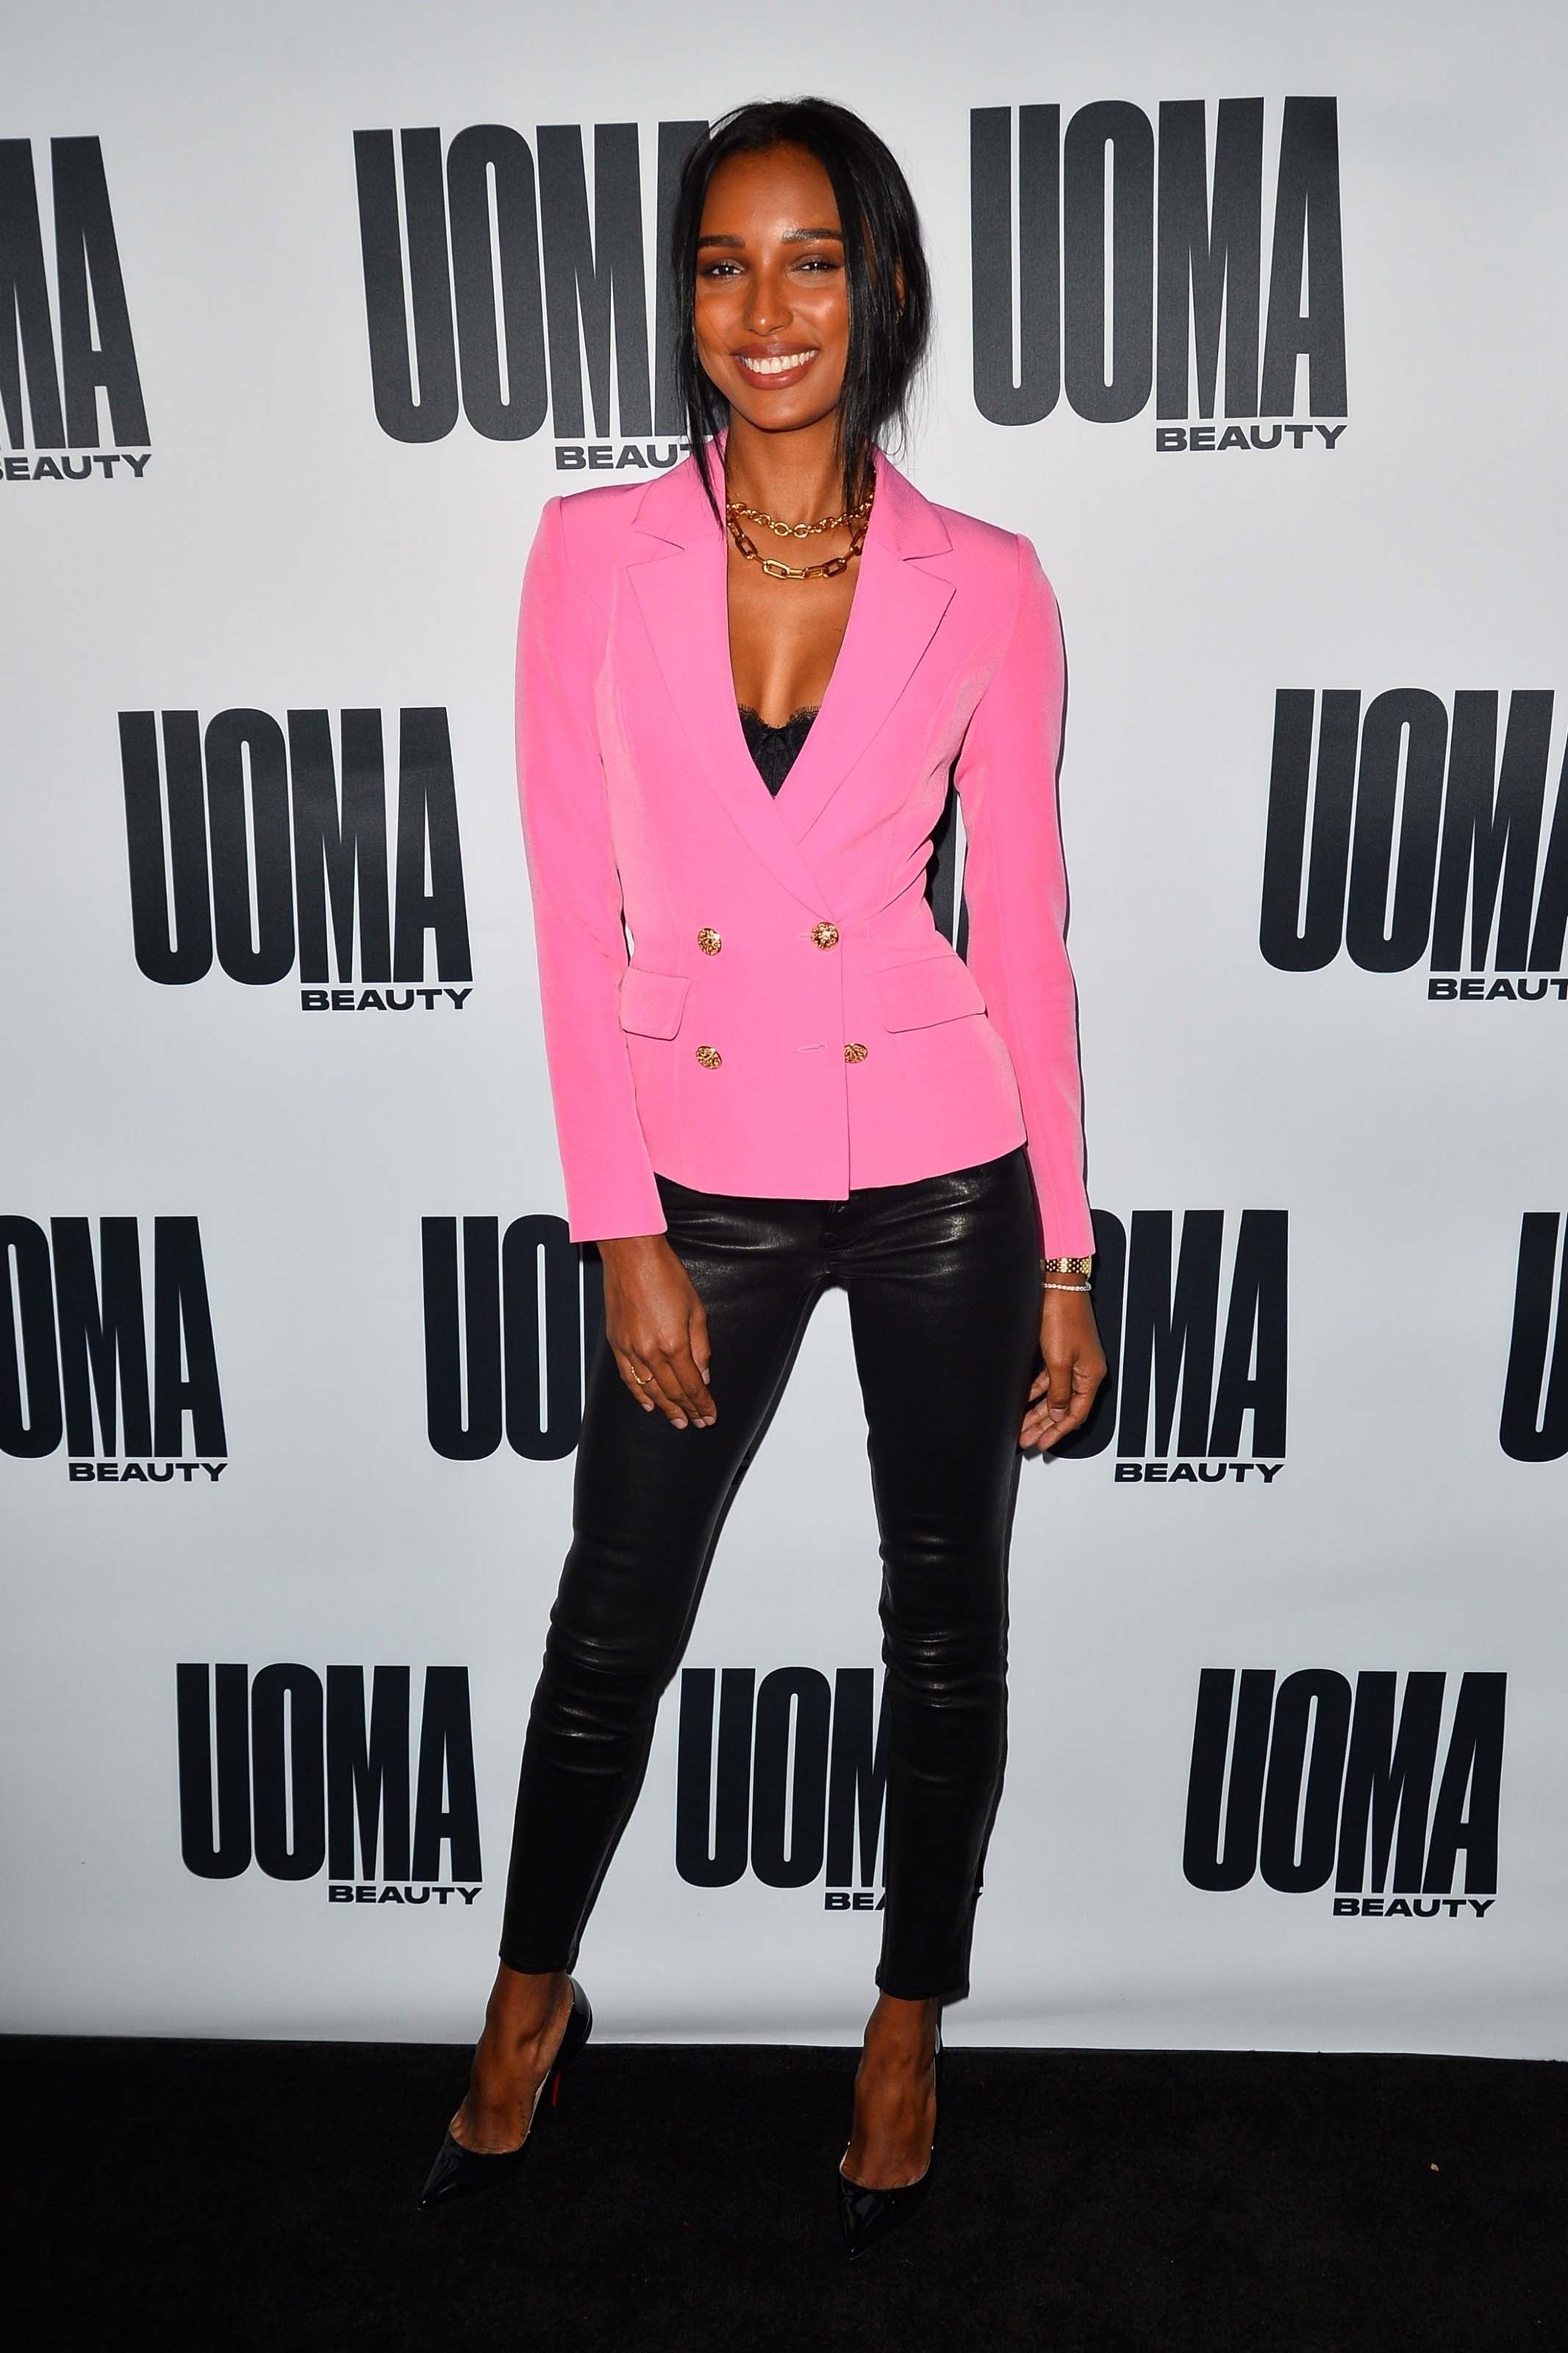 Jasmine Tookes attends UOMA Beauty Launch Arrivals in Los Angeles 25.04.2019